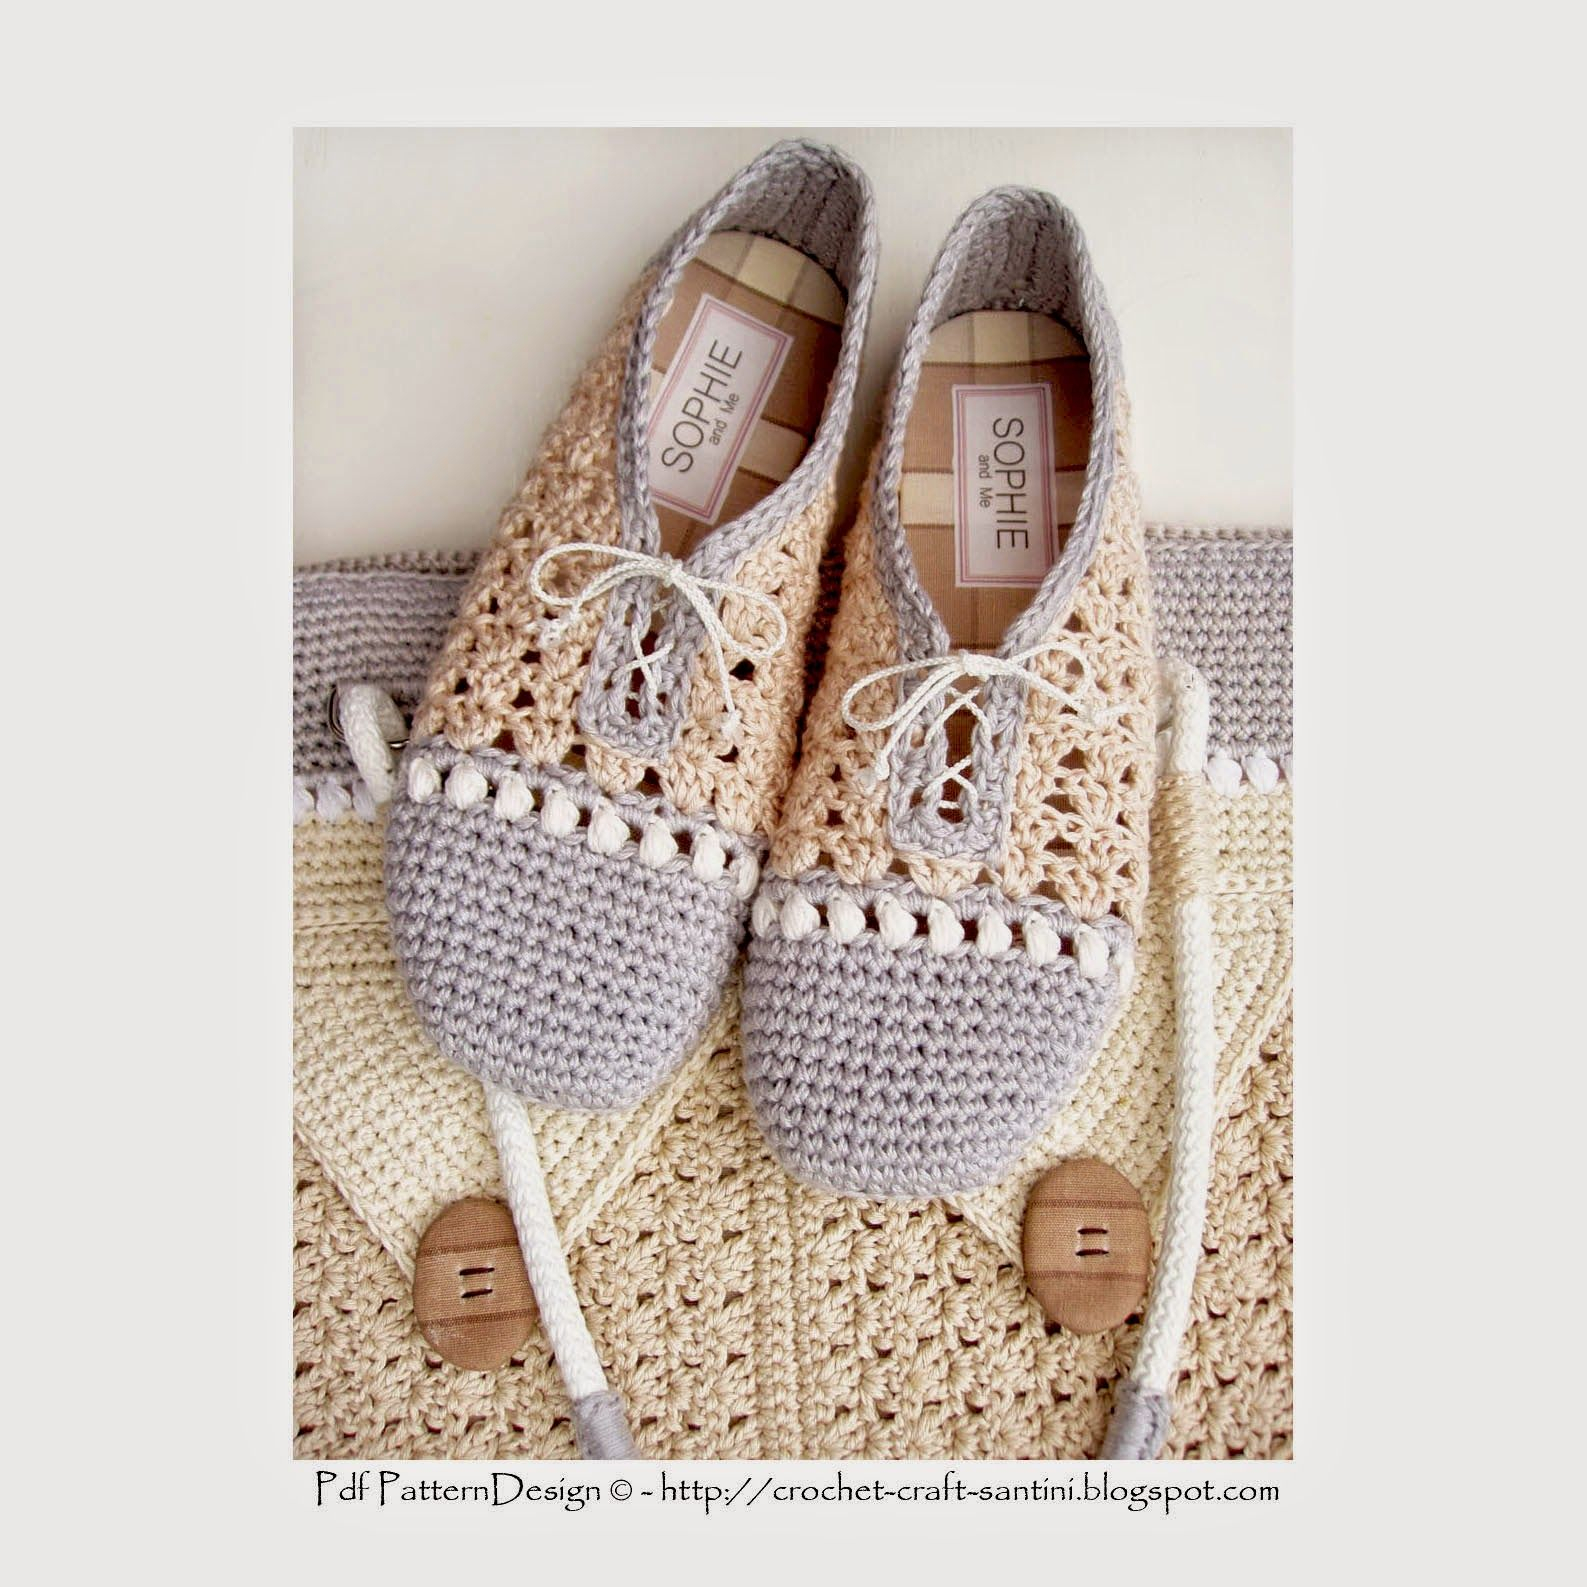 Crochet Shoes Pattern Sophie And Me Crochet Slippershoes With Matching Shopping Bag New